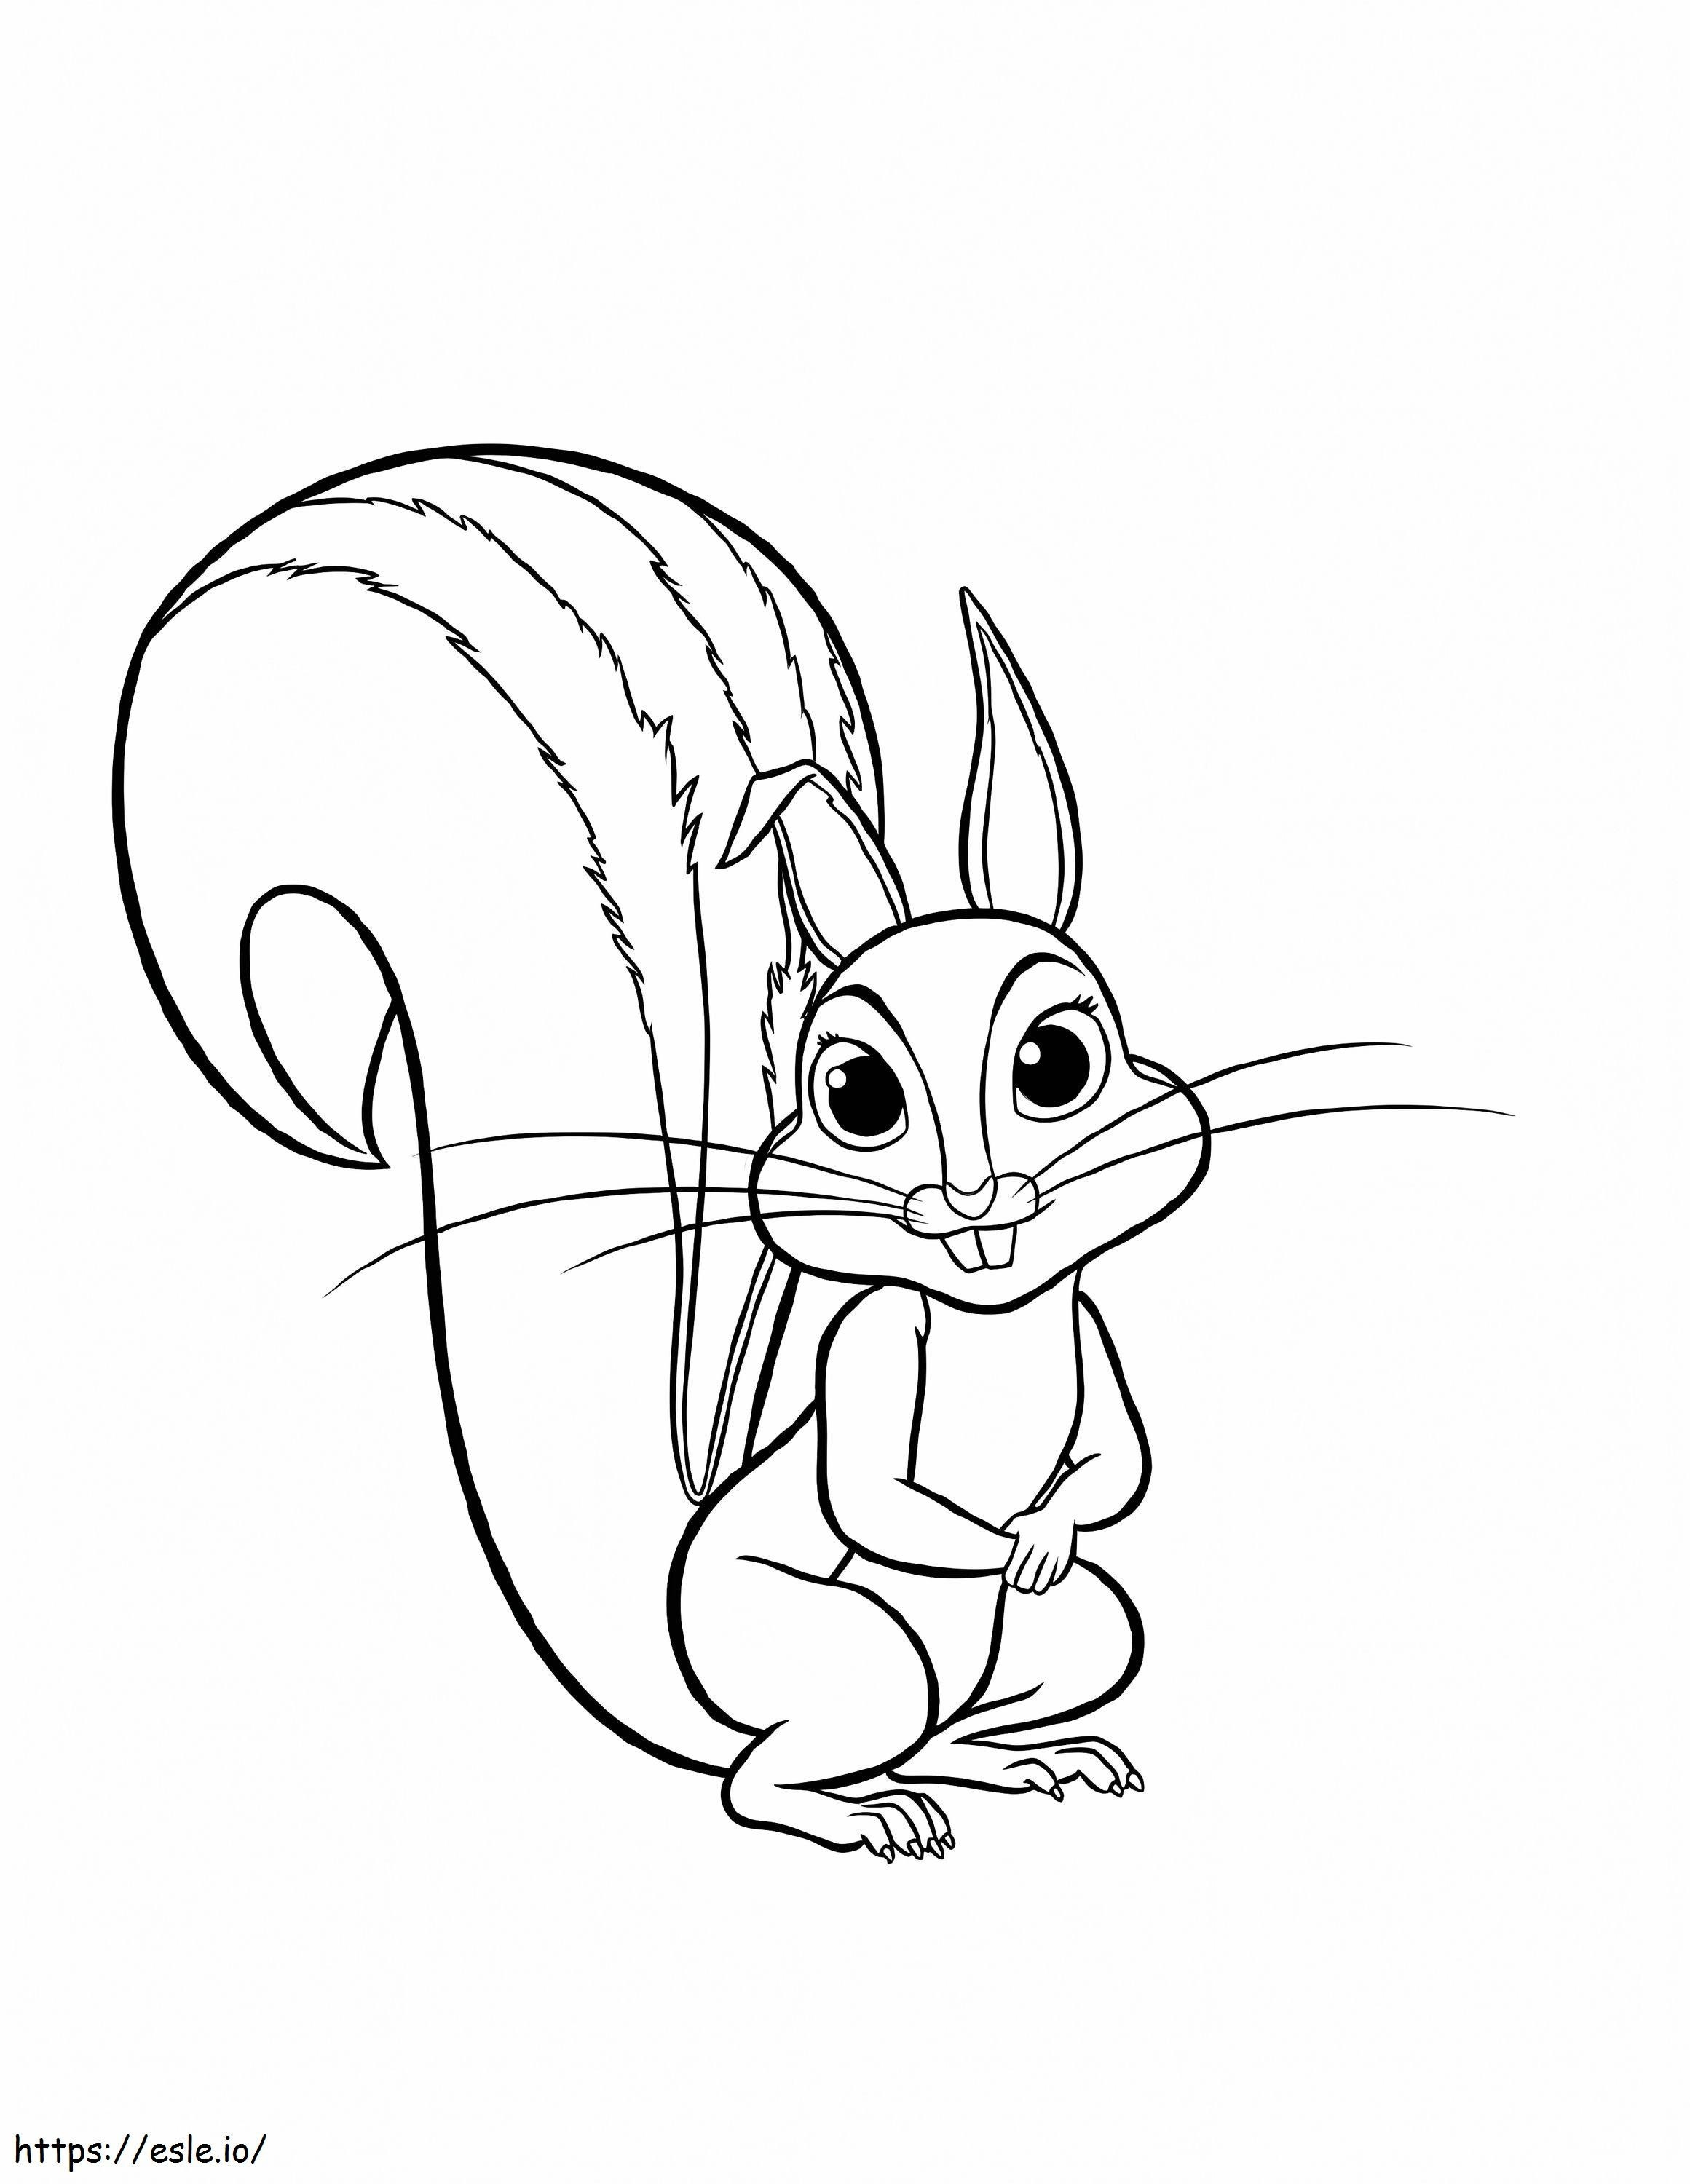 Squirrel Smiling coloring page